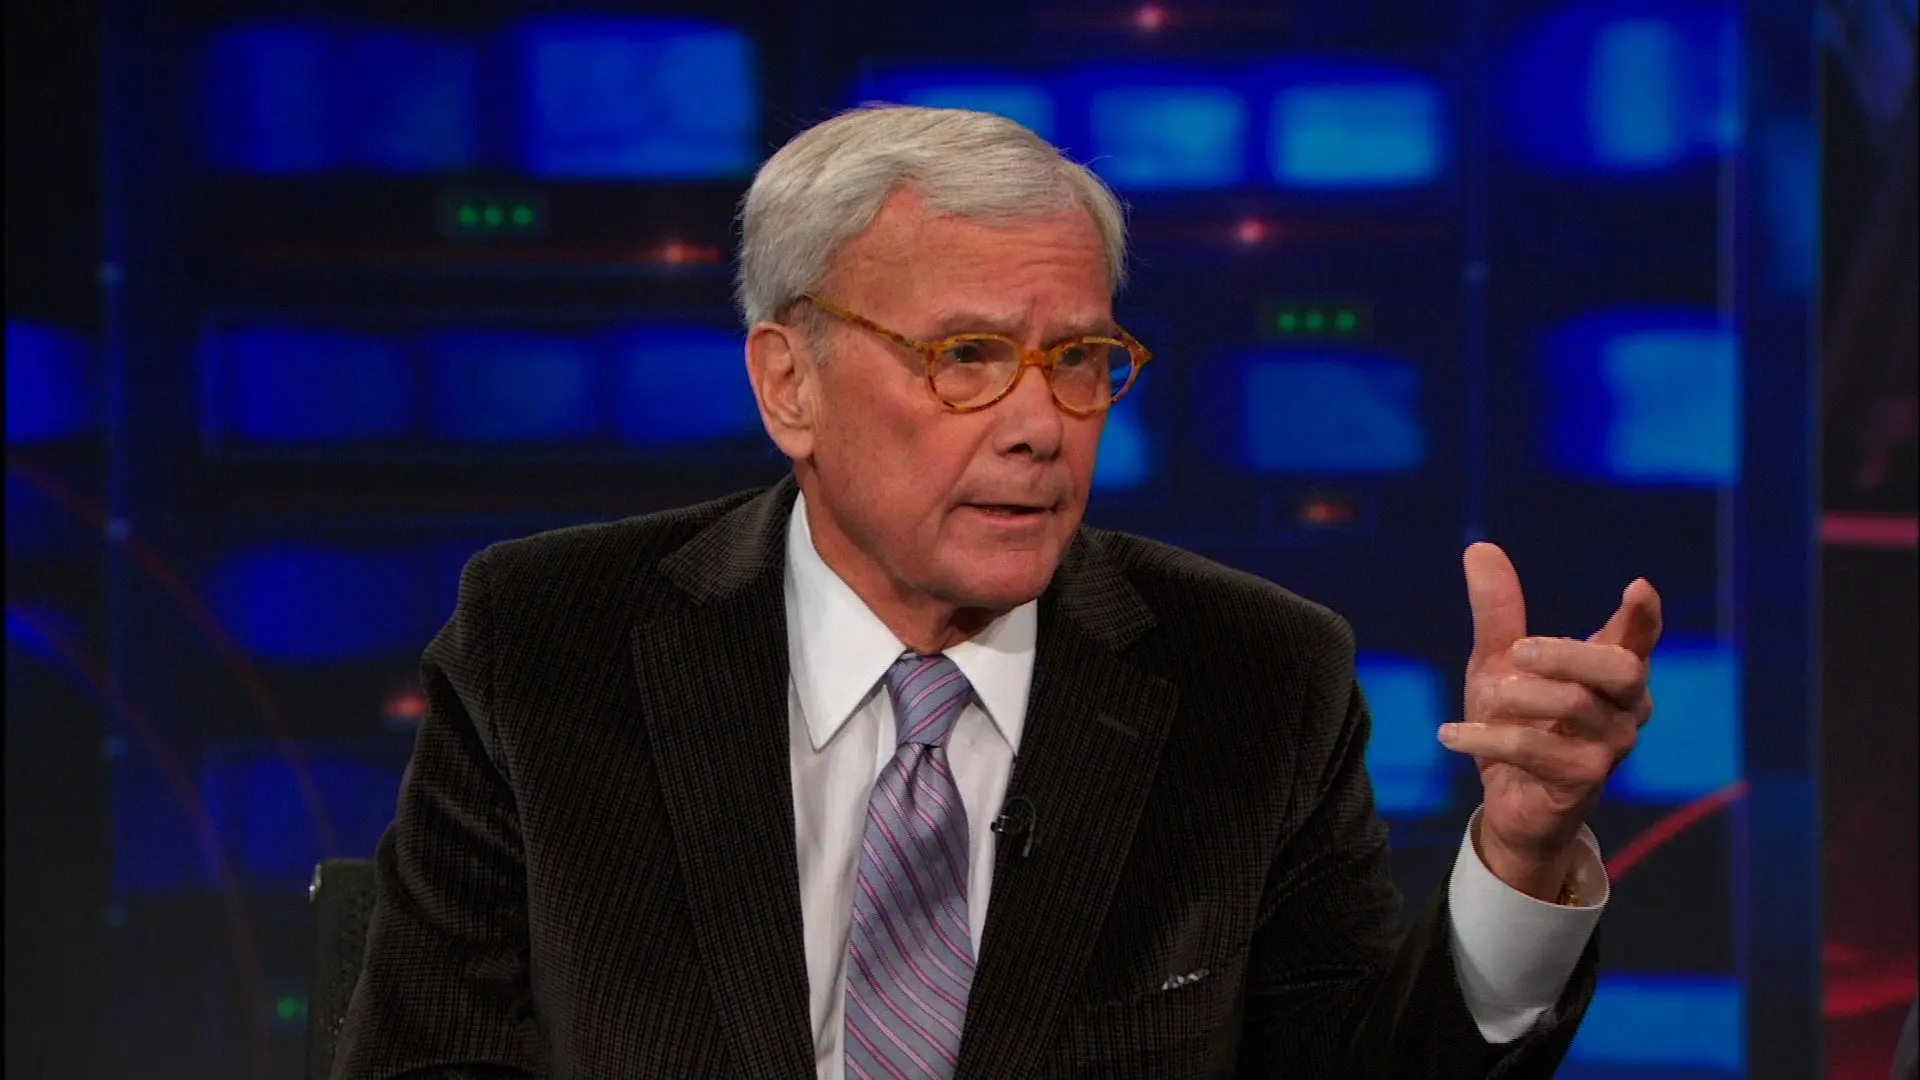 Tom Brokaw Retires From NBC, Following 55 Years The Union Journal